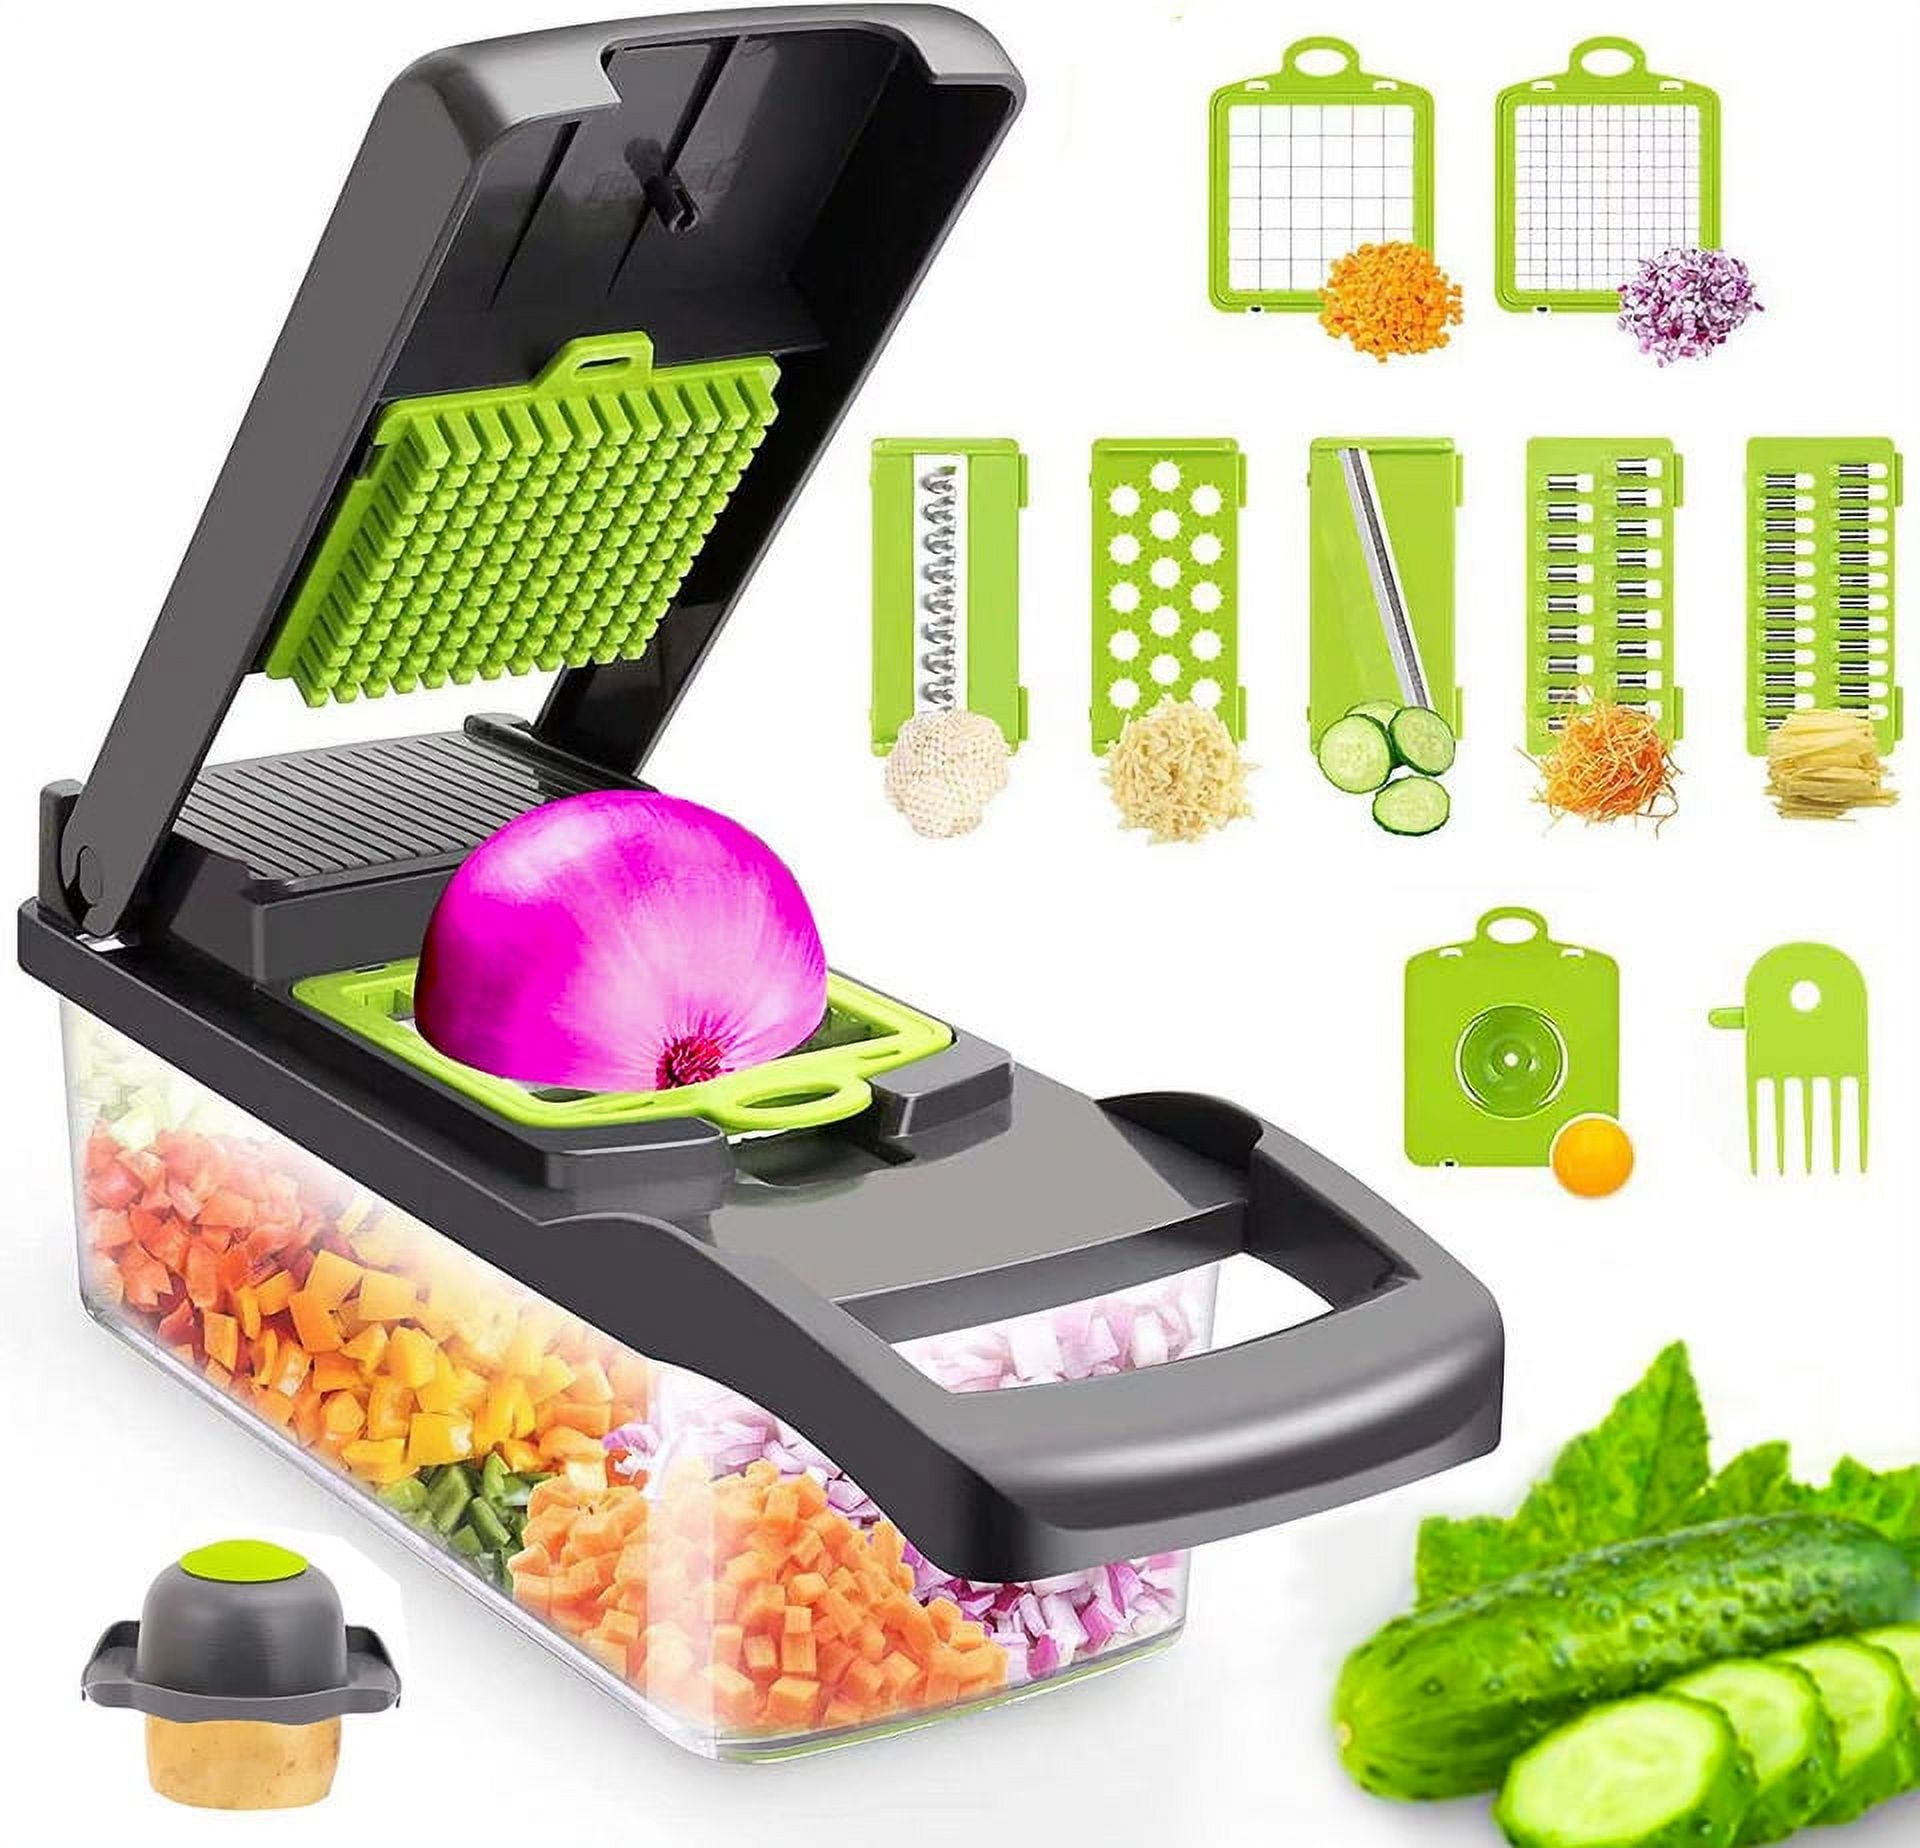 Axidou Multi-Functional Vegetable Chopper with 7 Interchangeable Blades -  Easy to Use & Clean - Grey Green, BPA Free - Kitchen Gadgets 